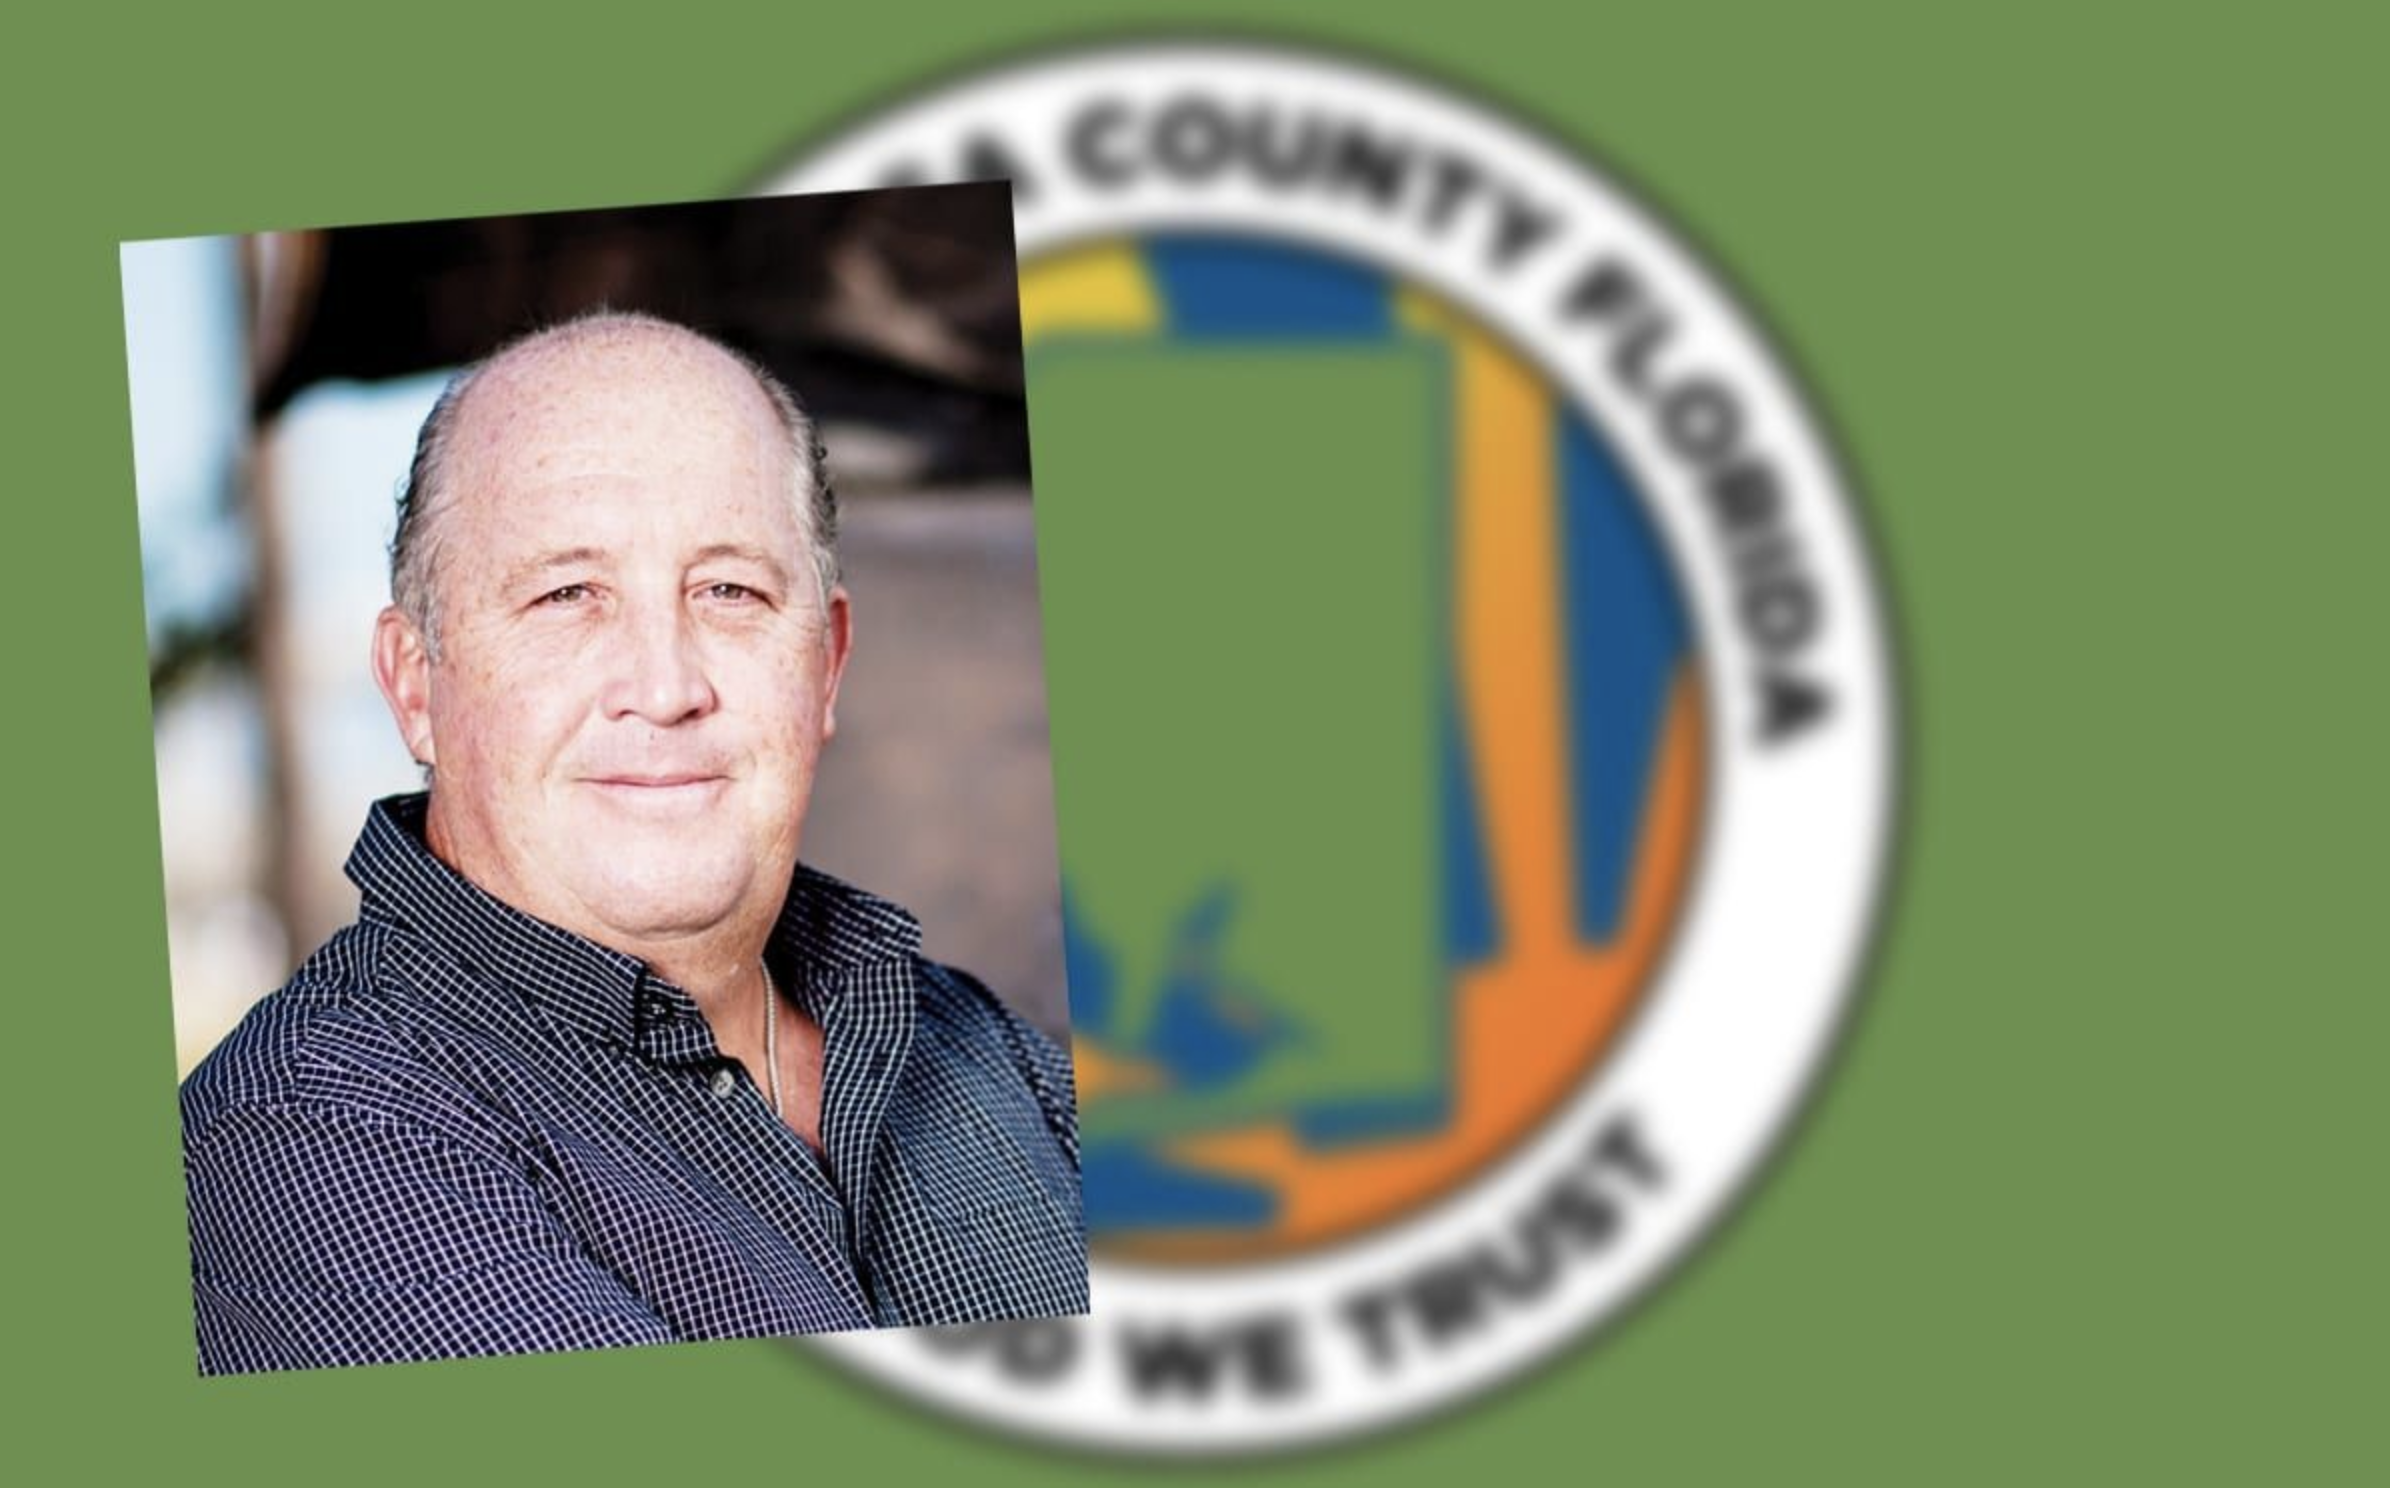 A county commissioner in front of the Santa Rosa County crest